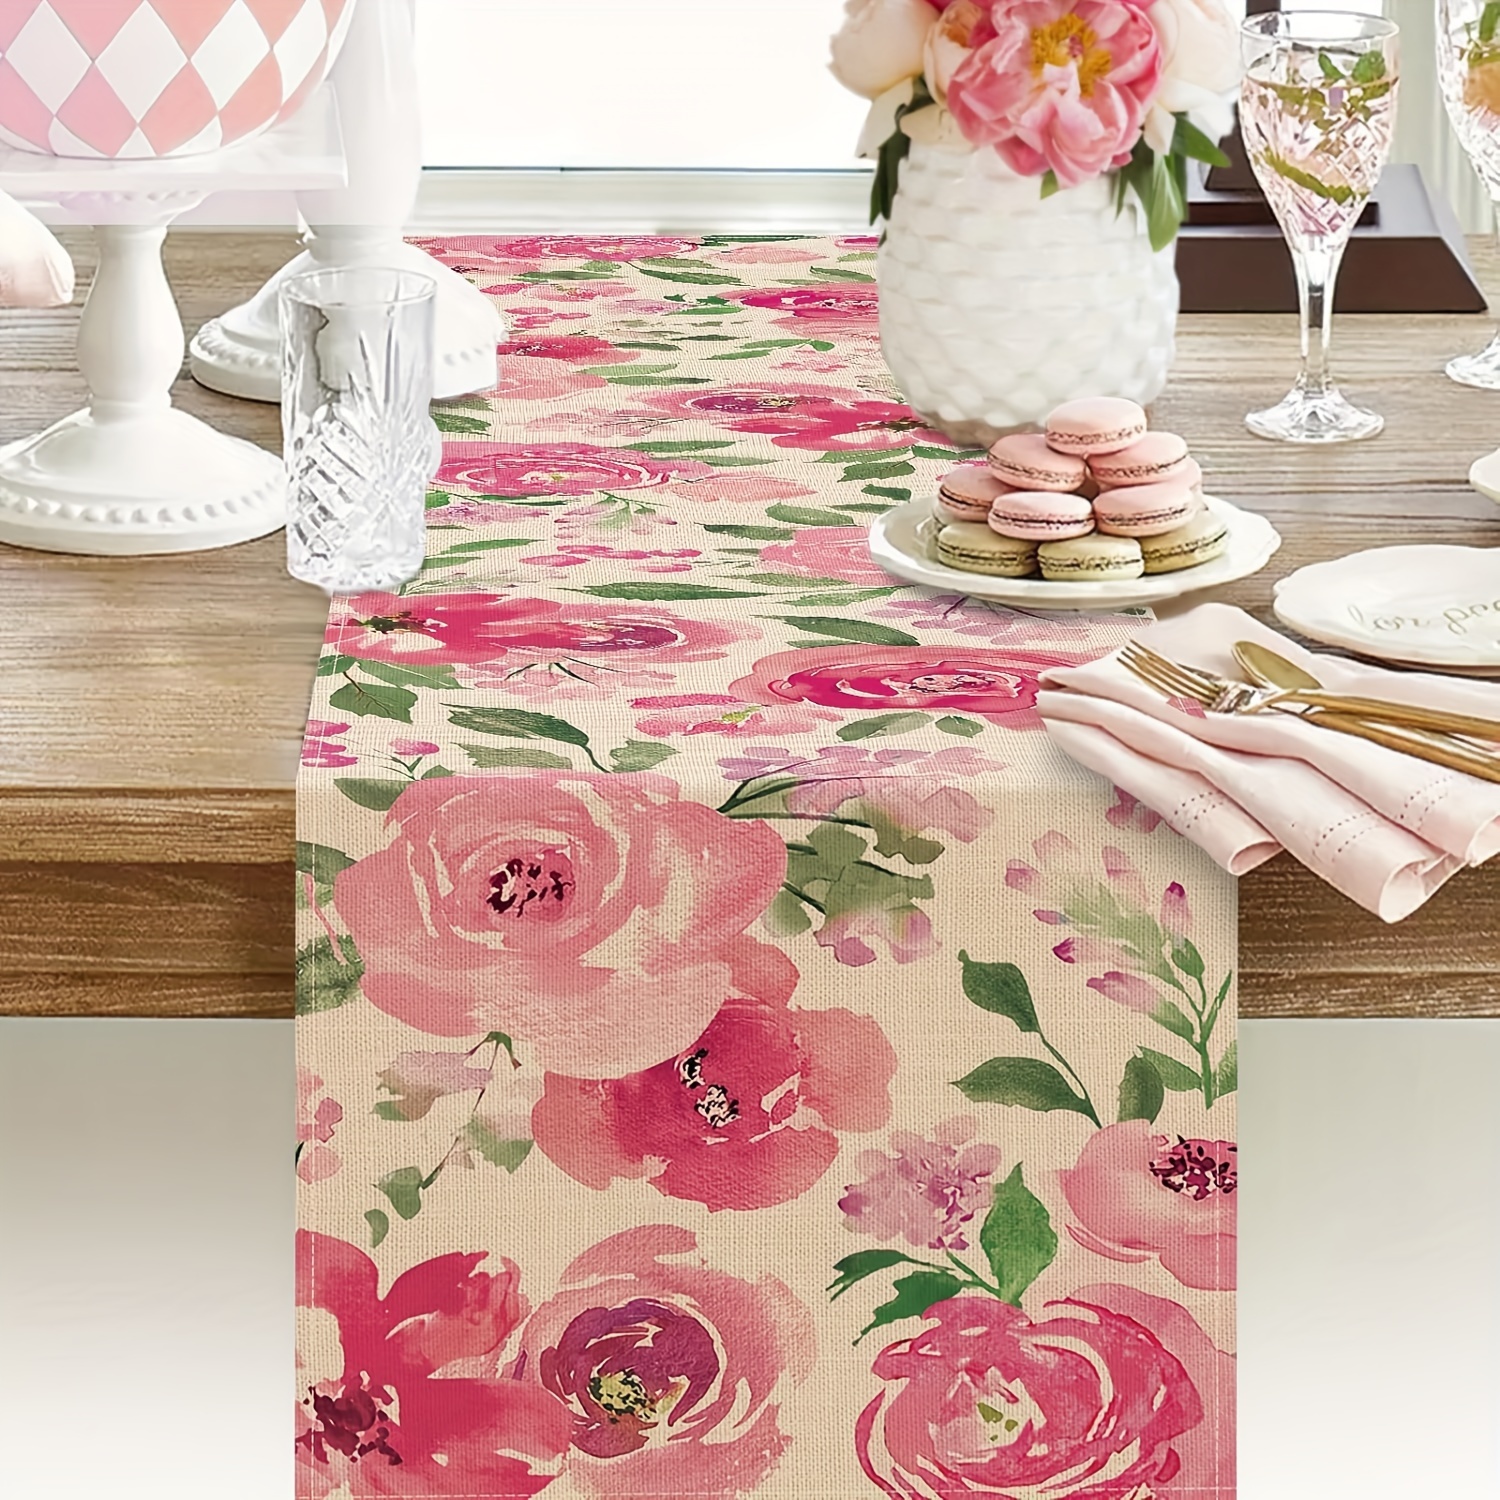 

1pc, Table Runner, Pink Floral Printed Table Runner, Spring Theme Floral Design, Dustproof & Wipe Clean Table Runner, Perfect For Home Party Decor, Dining Table Decoration, Aesthetic Room Decor